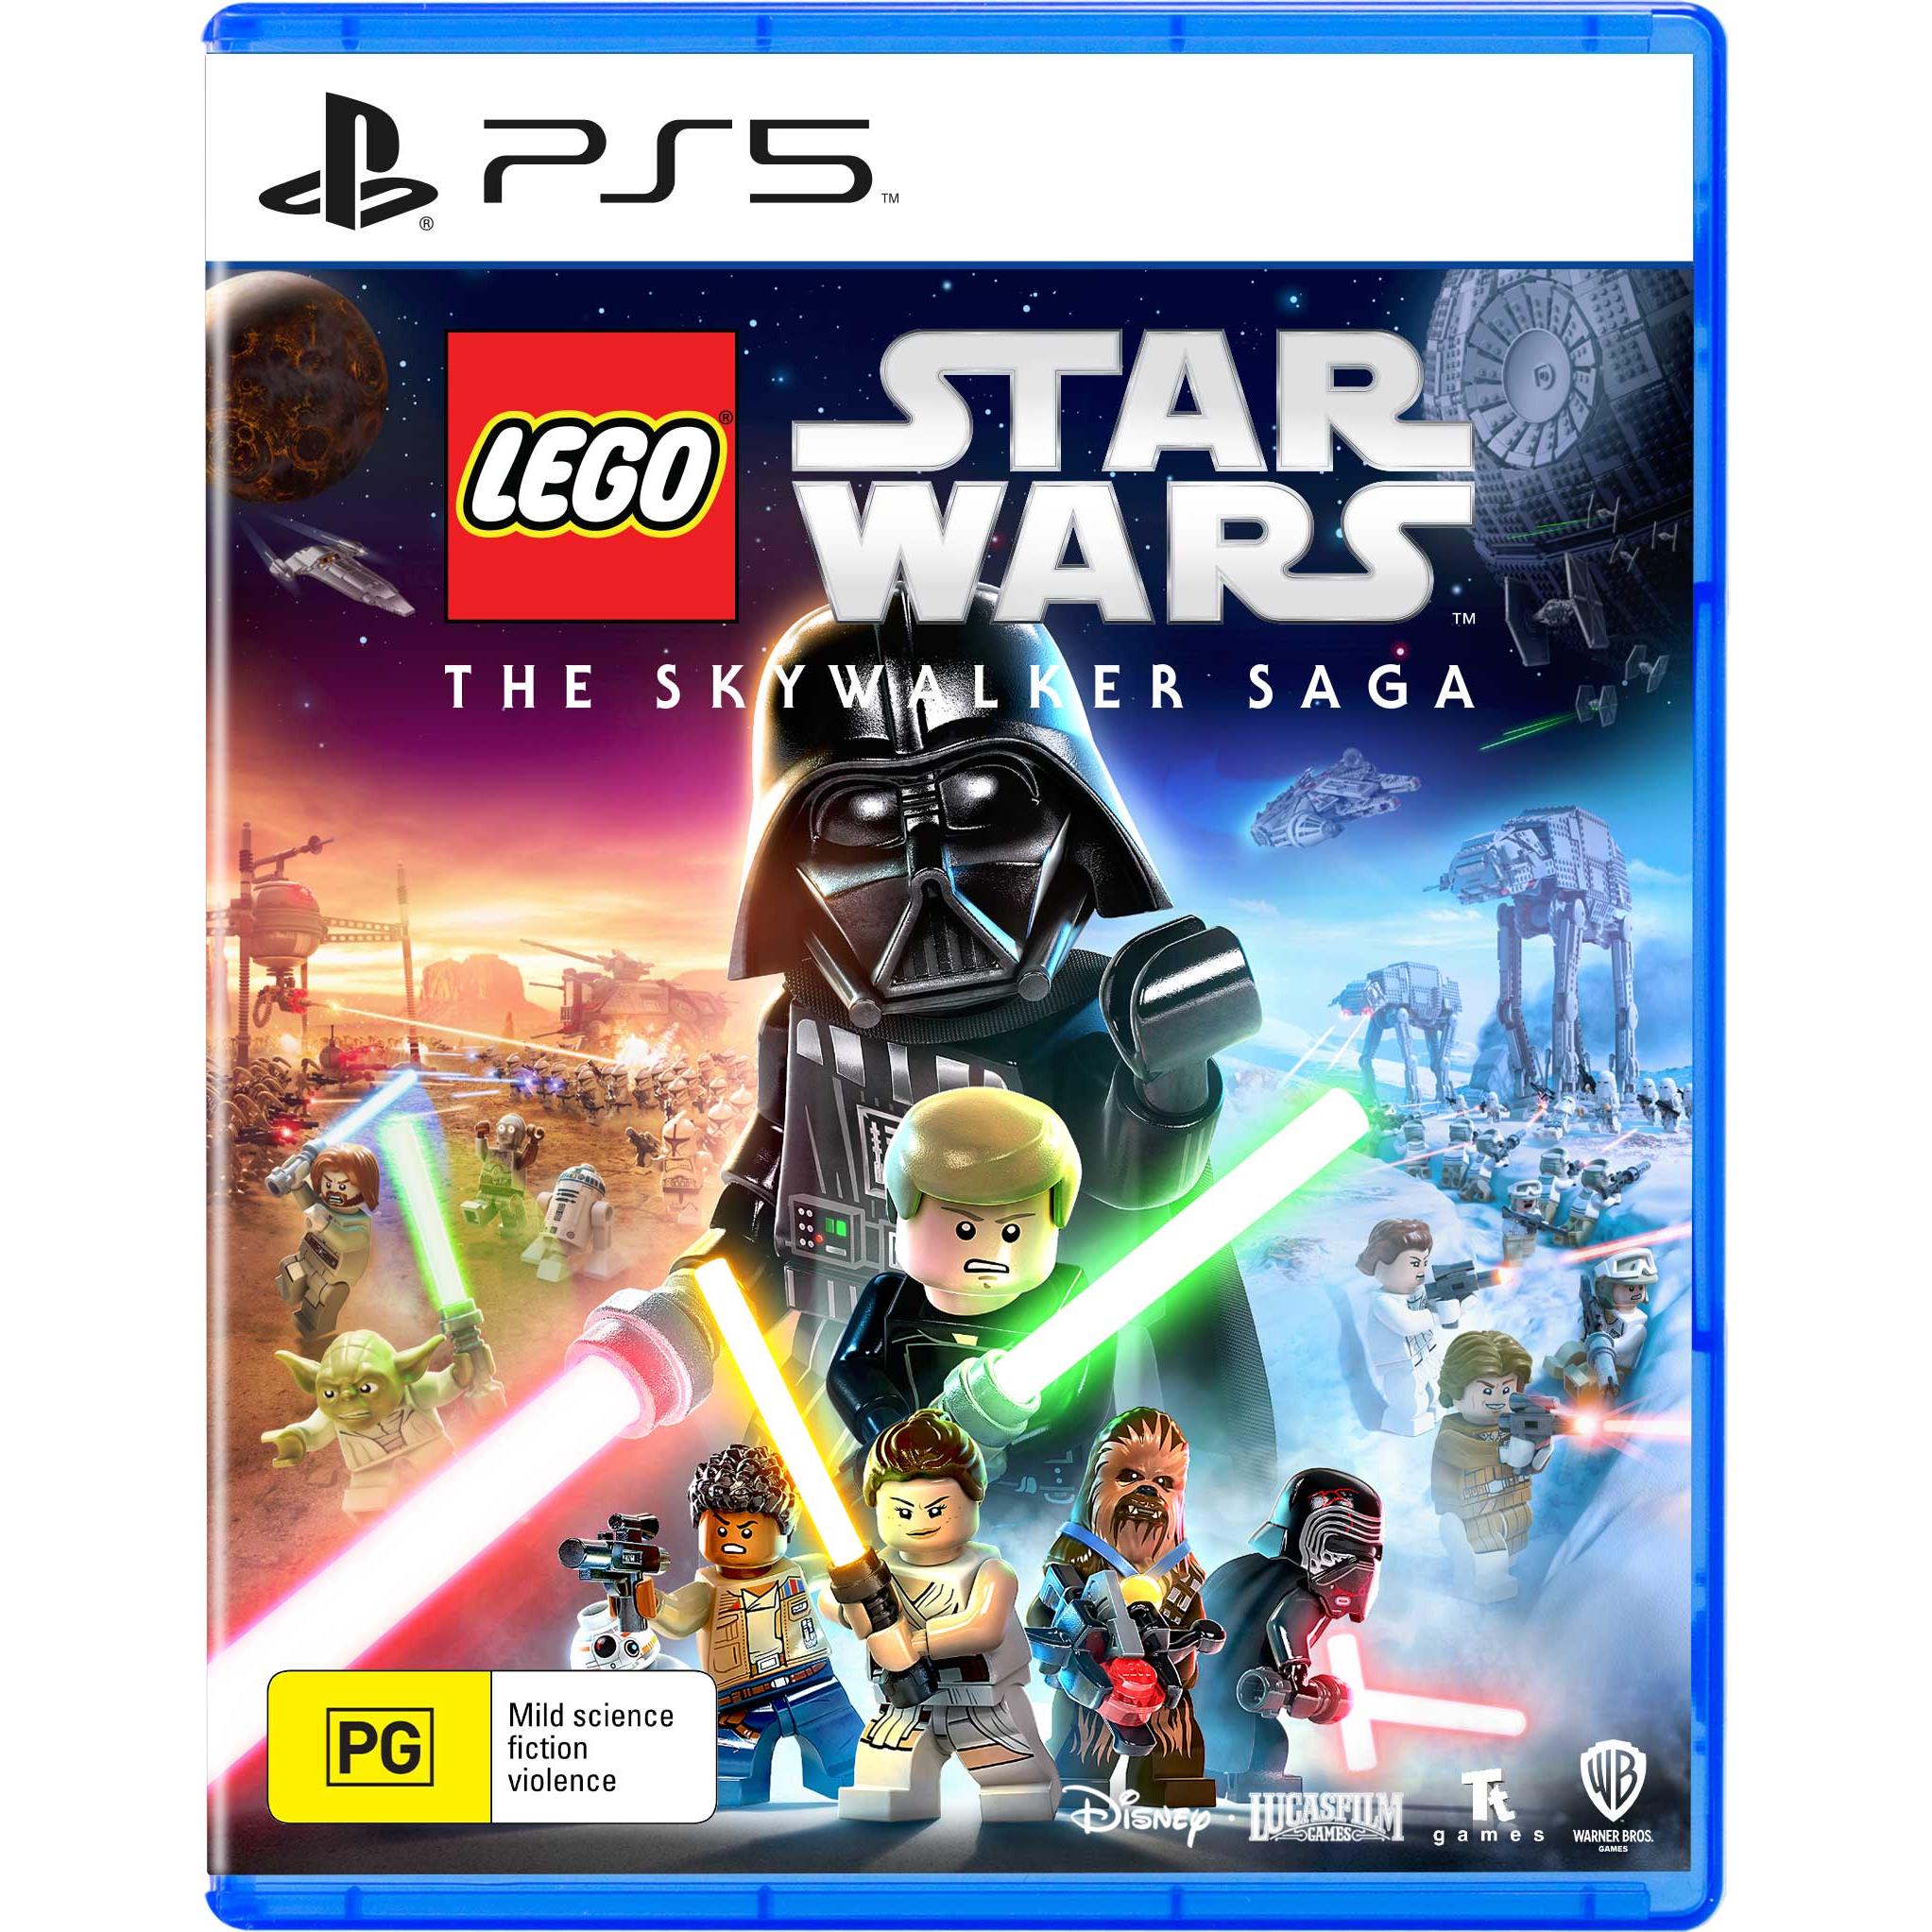 LEGO® Star Wars™: The Skywalker Saga Character Collection 2, PC Steam  Downloadable Content